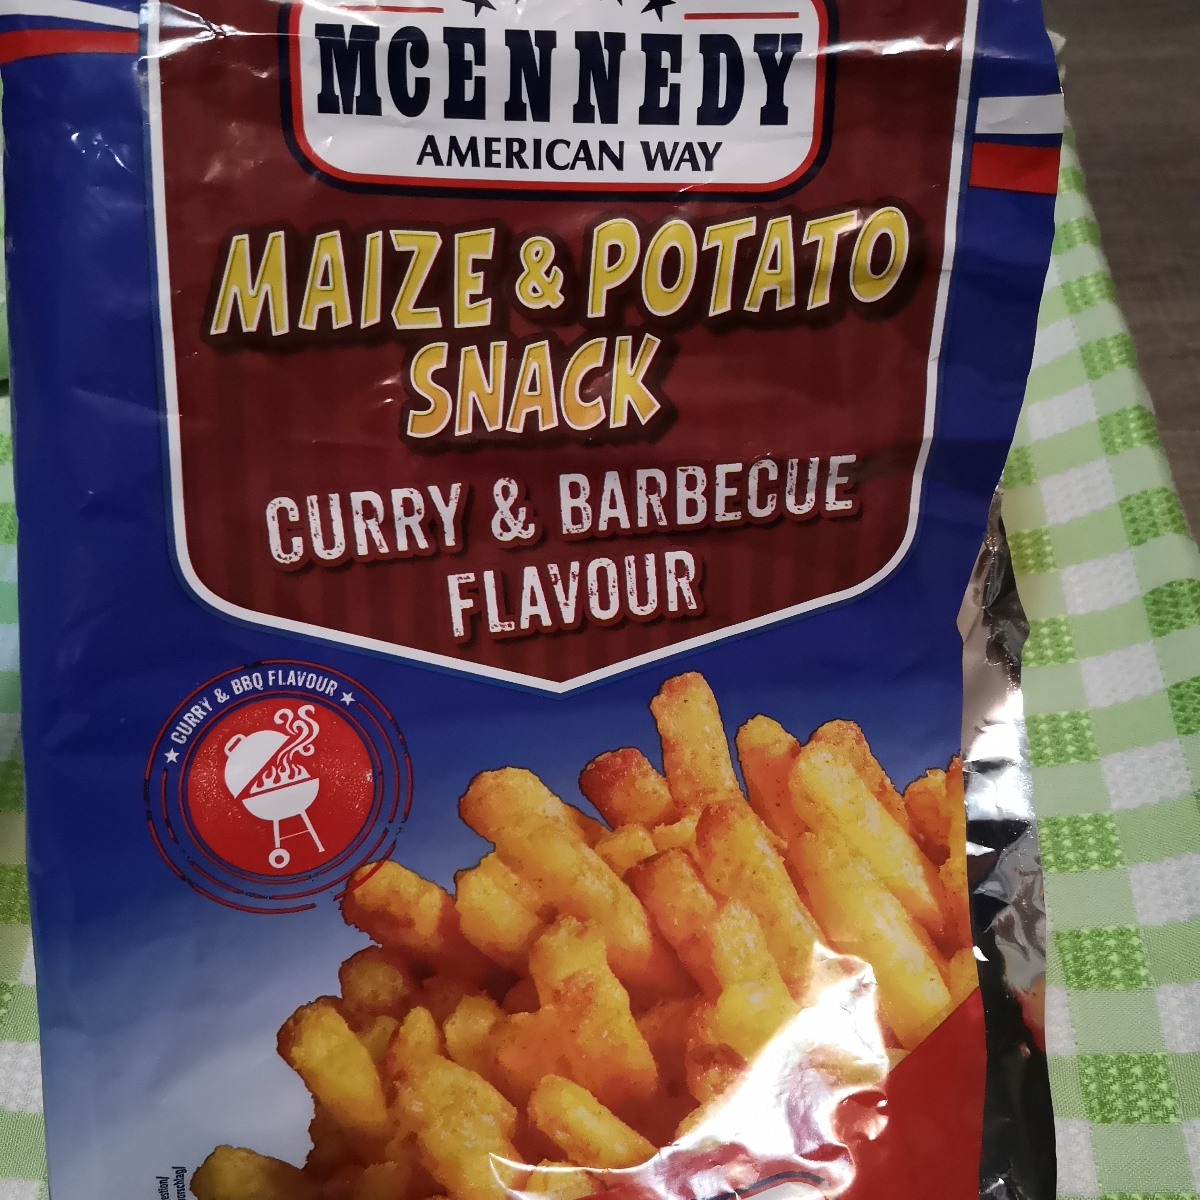 flavor Curry Barbecue | and snack abillion Reviews potato Maize Mcennedy and